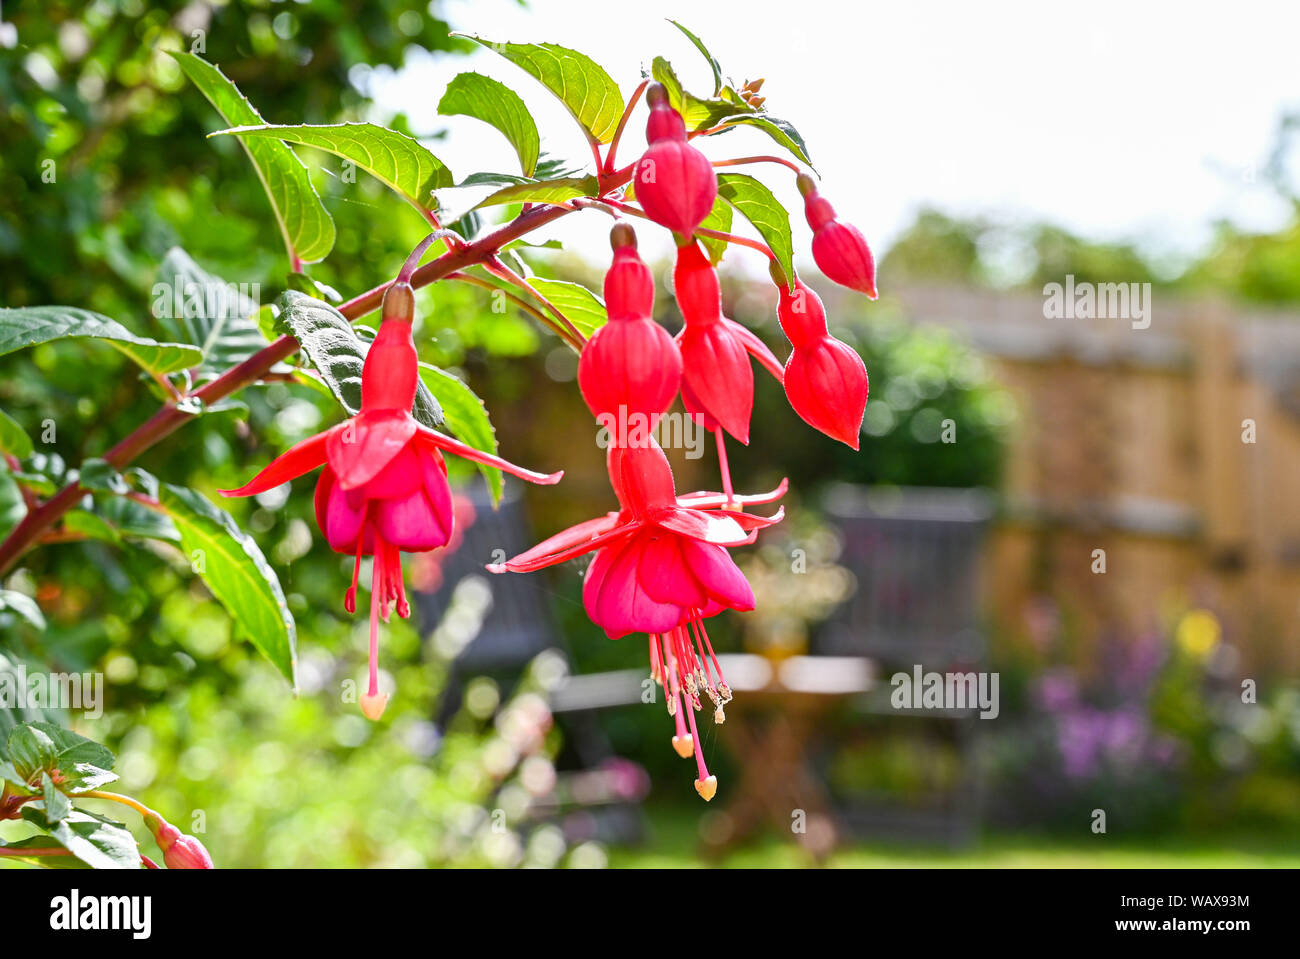 Garden plants and flowers Brighton Sussex UK red or pink fuschia flowers Stock Photo